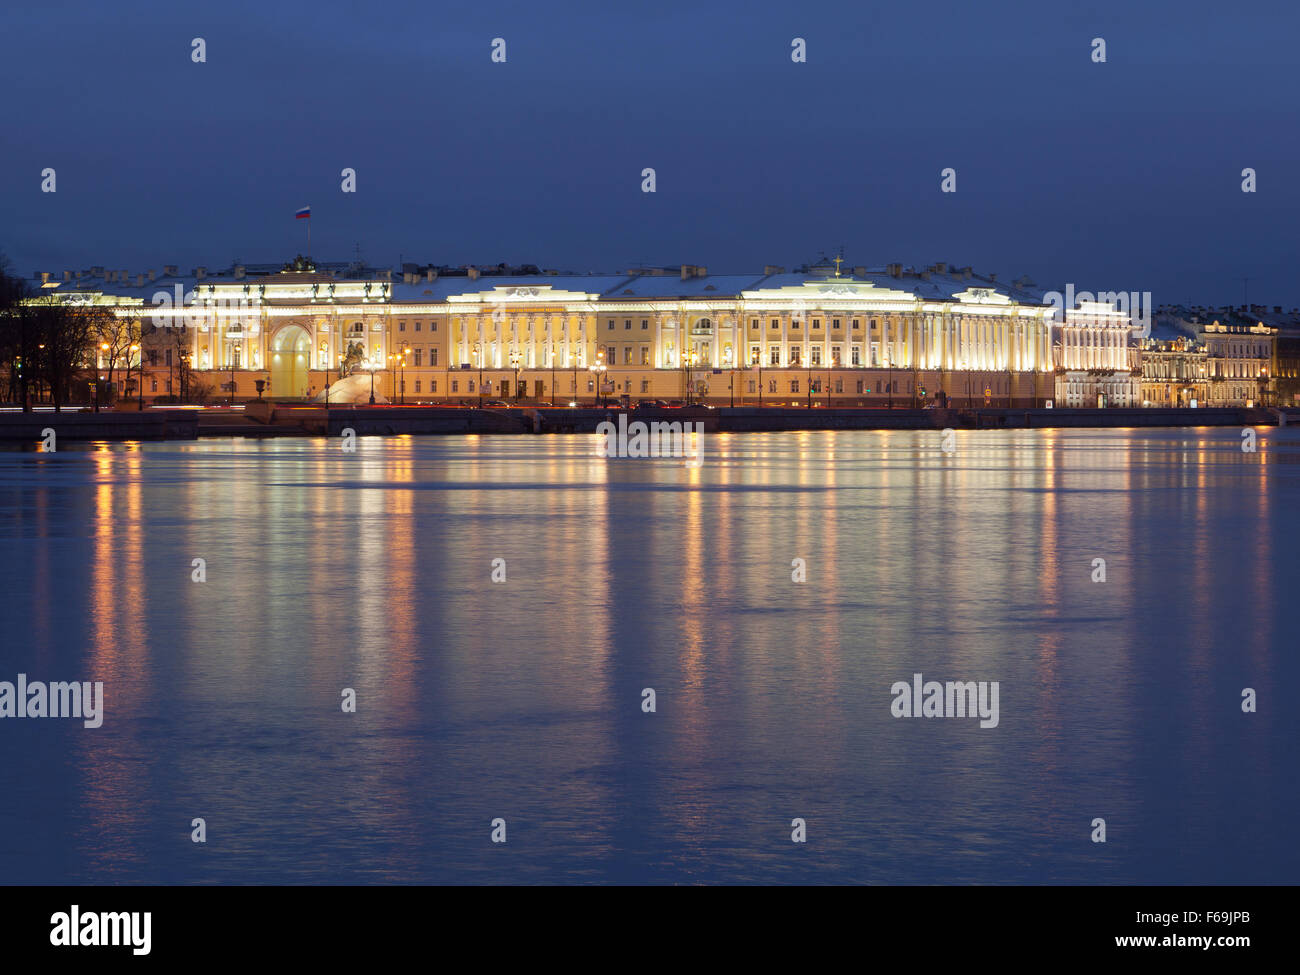 Senate and Synod Building, St. Petersburg, Russia. Stock Photo